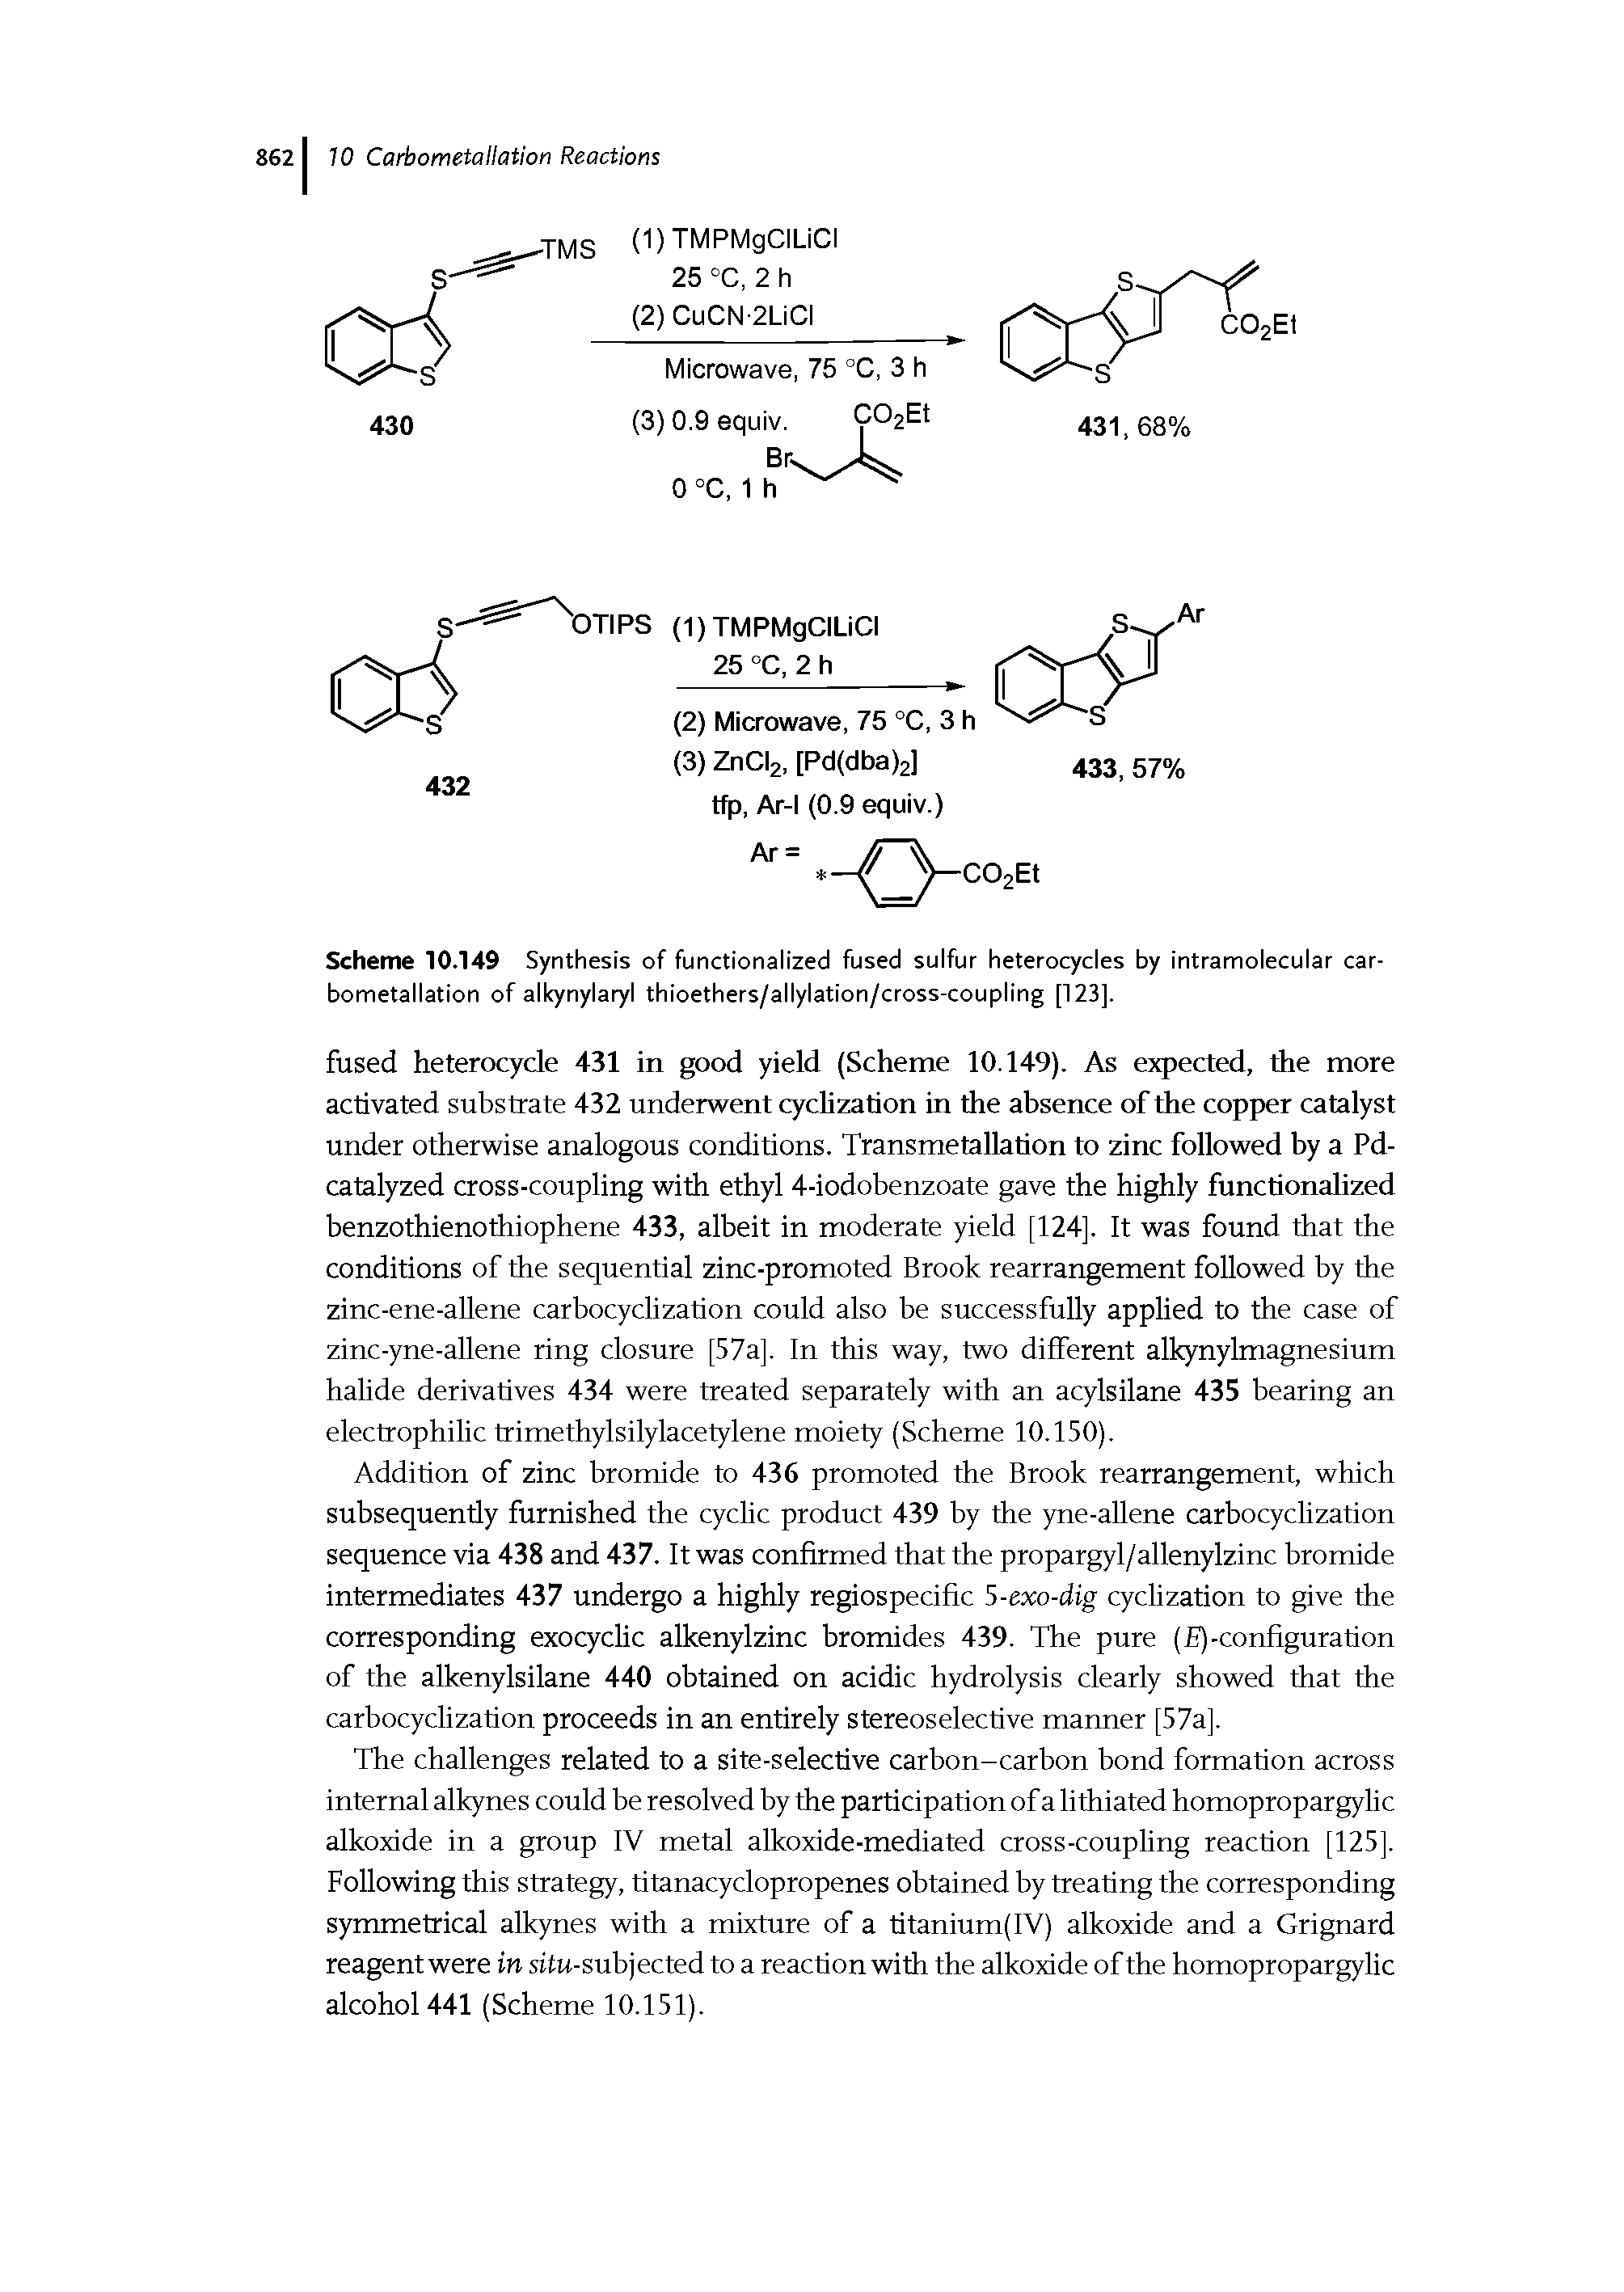 Scheme 10.149 Synthesis of functionalized fused sulfur heterocycles by intramolecular carbometallation of alkynylaryl thioethers/allylation/cross-coupling [123].